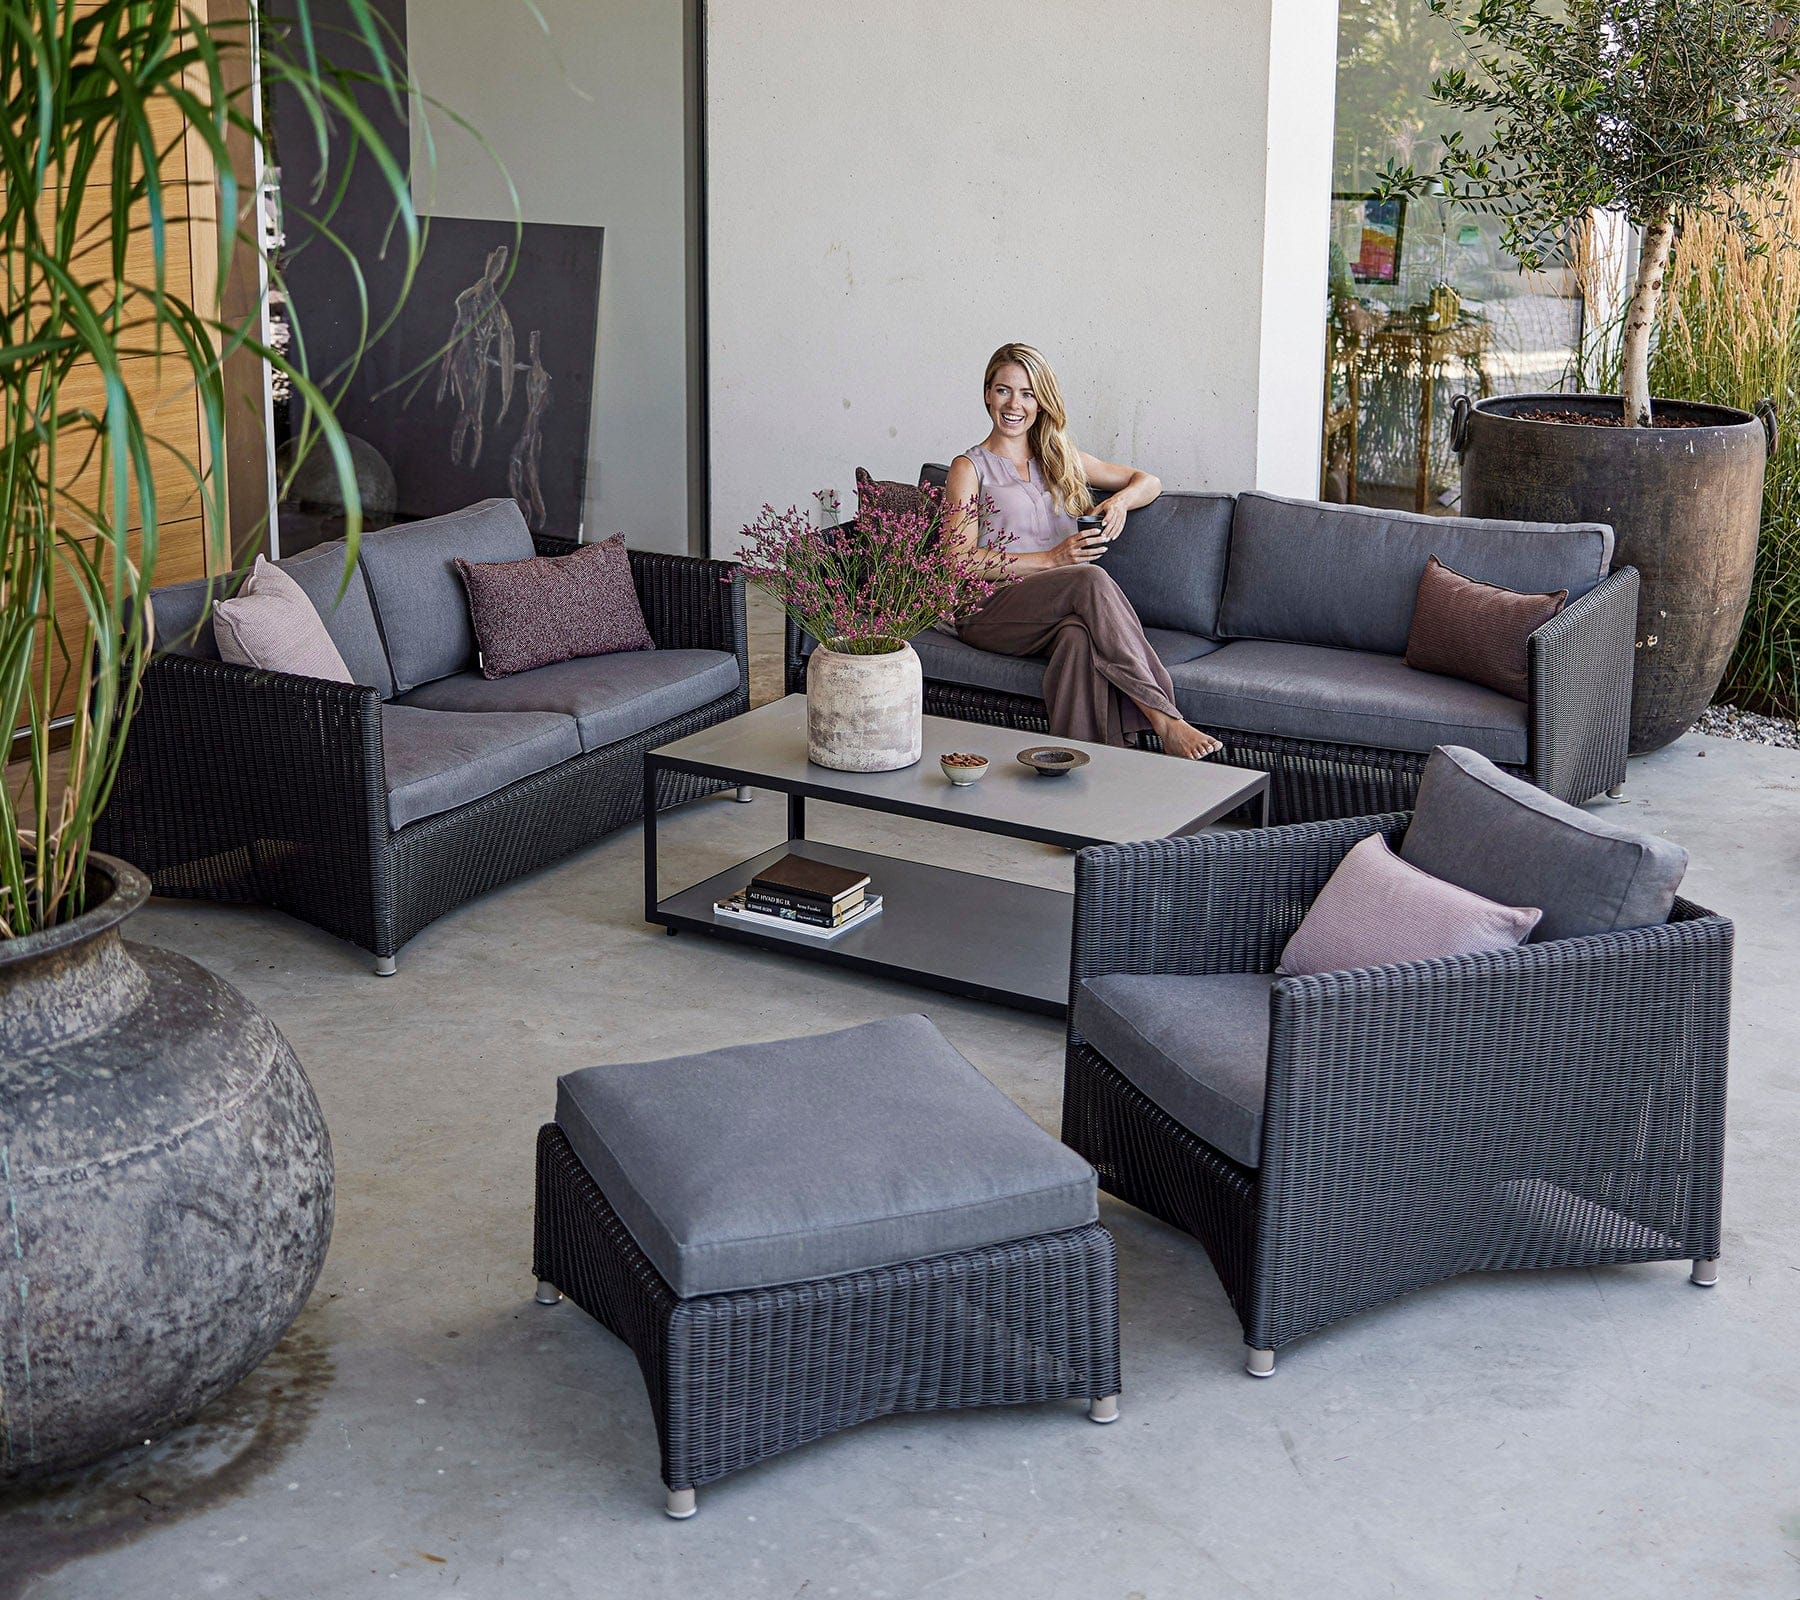 Boxhill's Diamond 2-Seater Weave Sofa lifestyle image with Diamond 3-Seater Weave Sofa, Diamond Weave Lounge Chair and Diamond Weave Footstool with a woman sitting down at patio